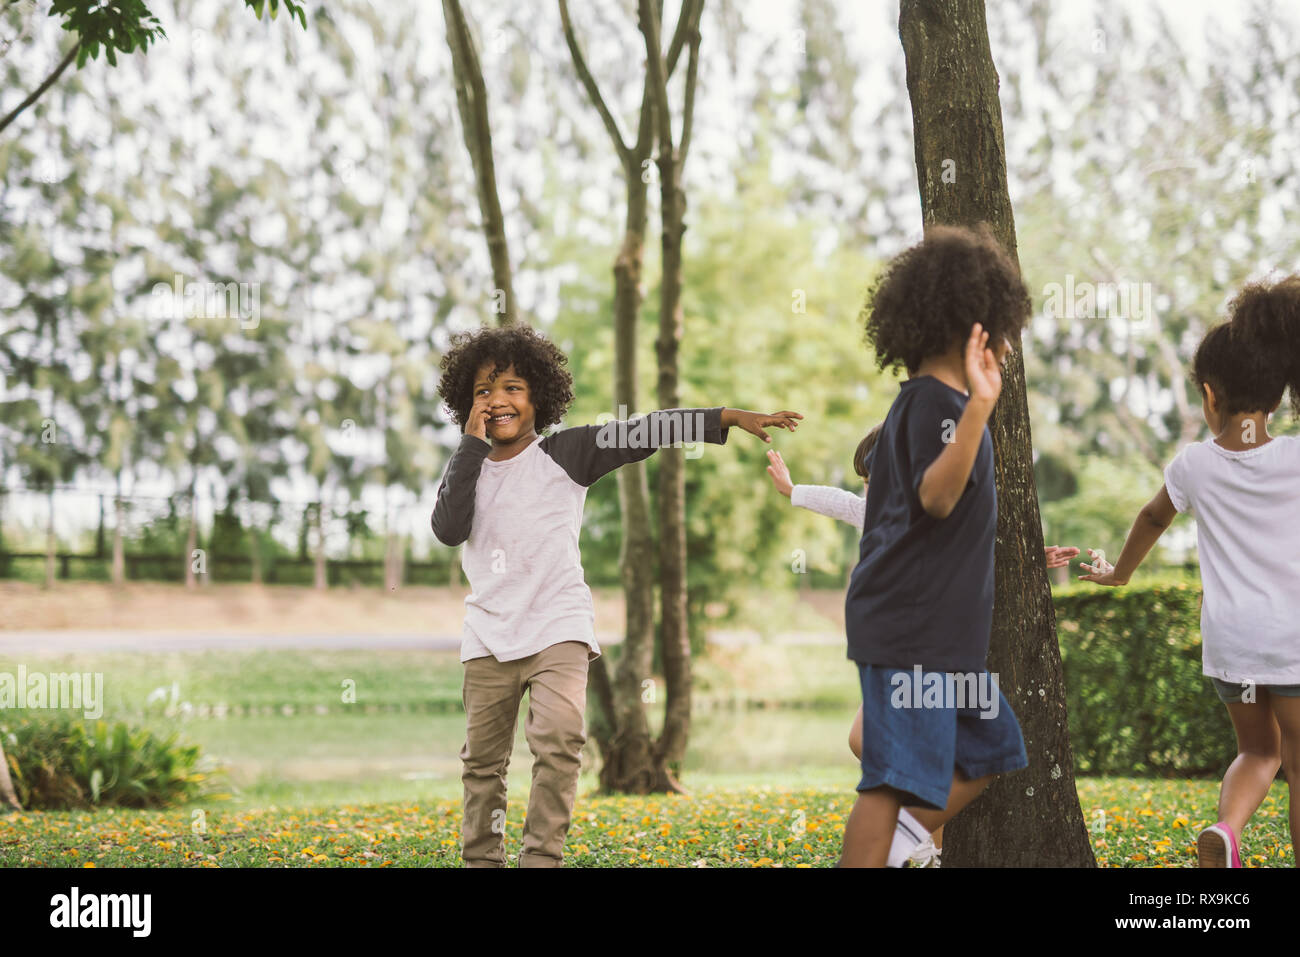 kids playing outdoors with friends. little children play at nature park. Stock Photo